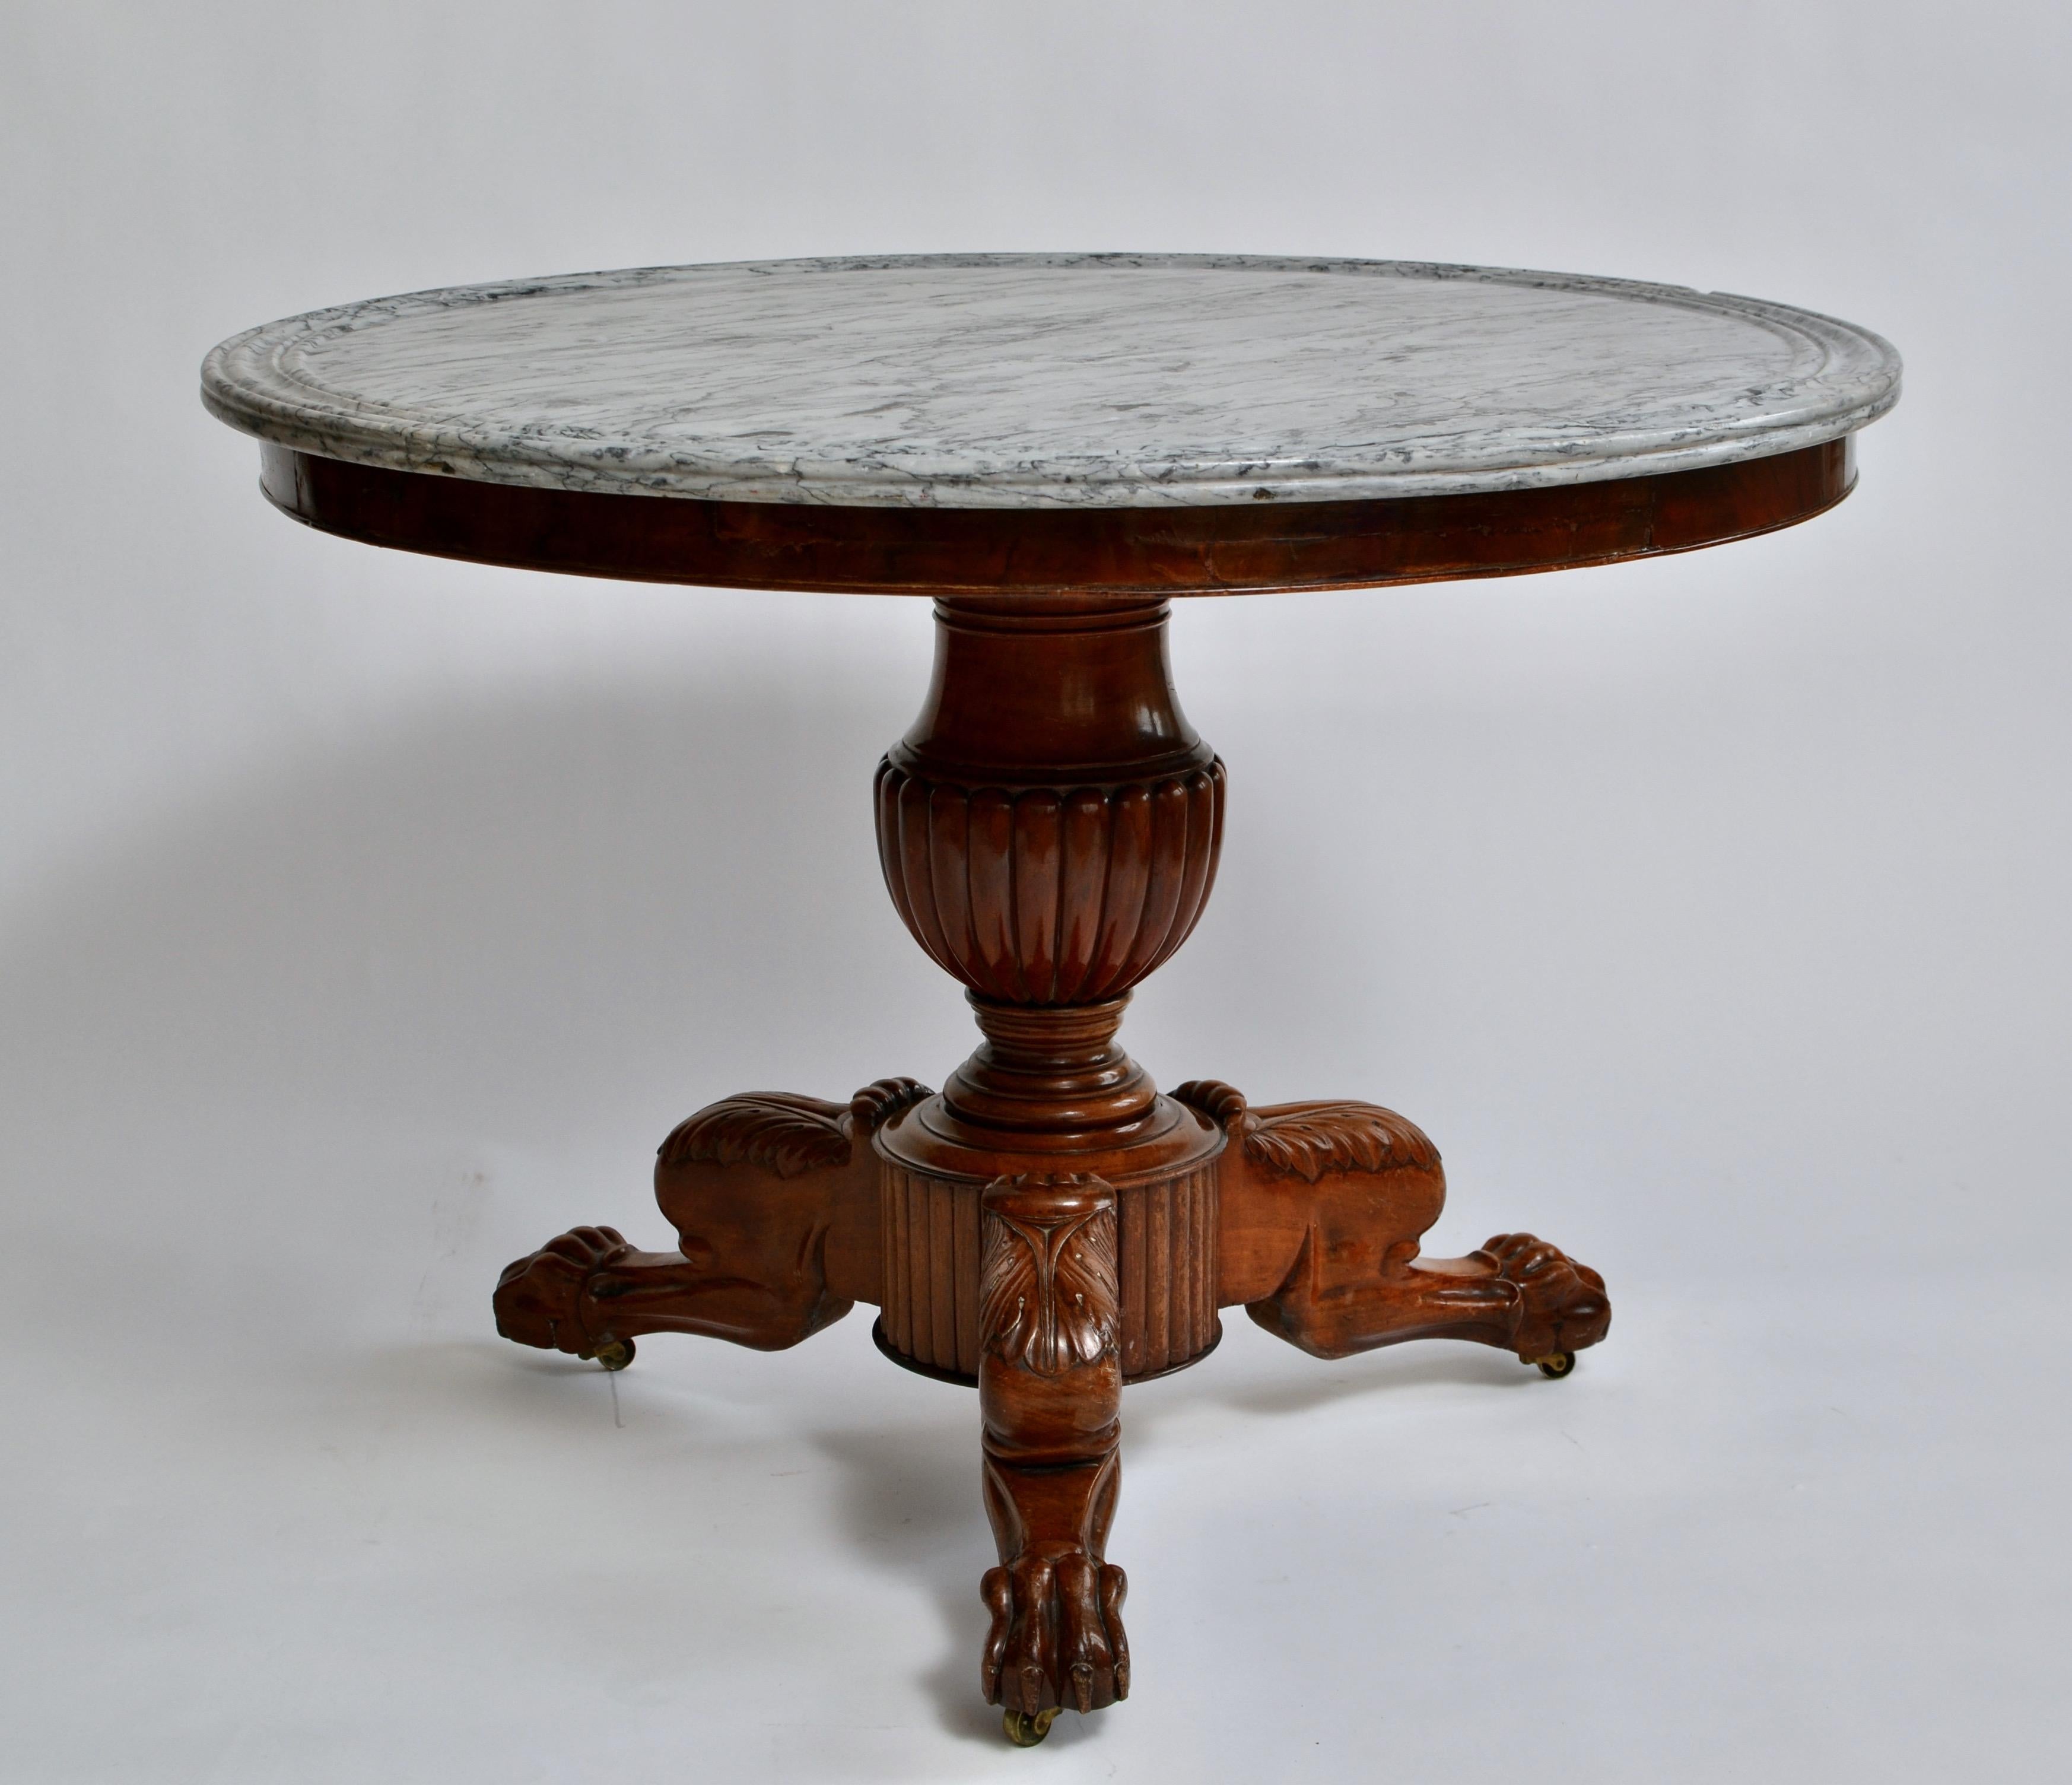 French Empire Mahogany Gueridon Table with a Grey Marble Top 1